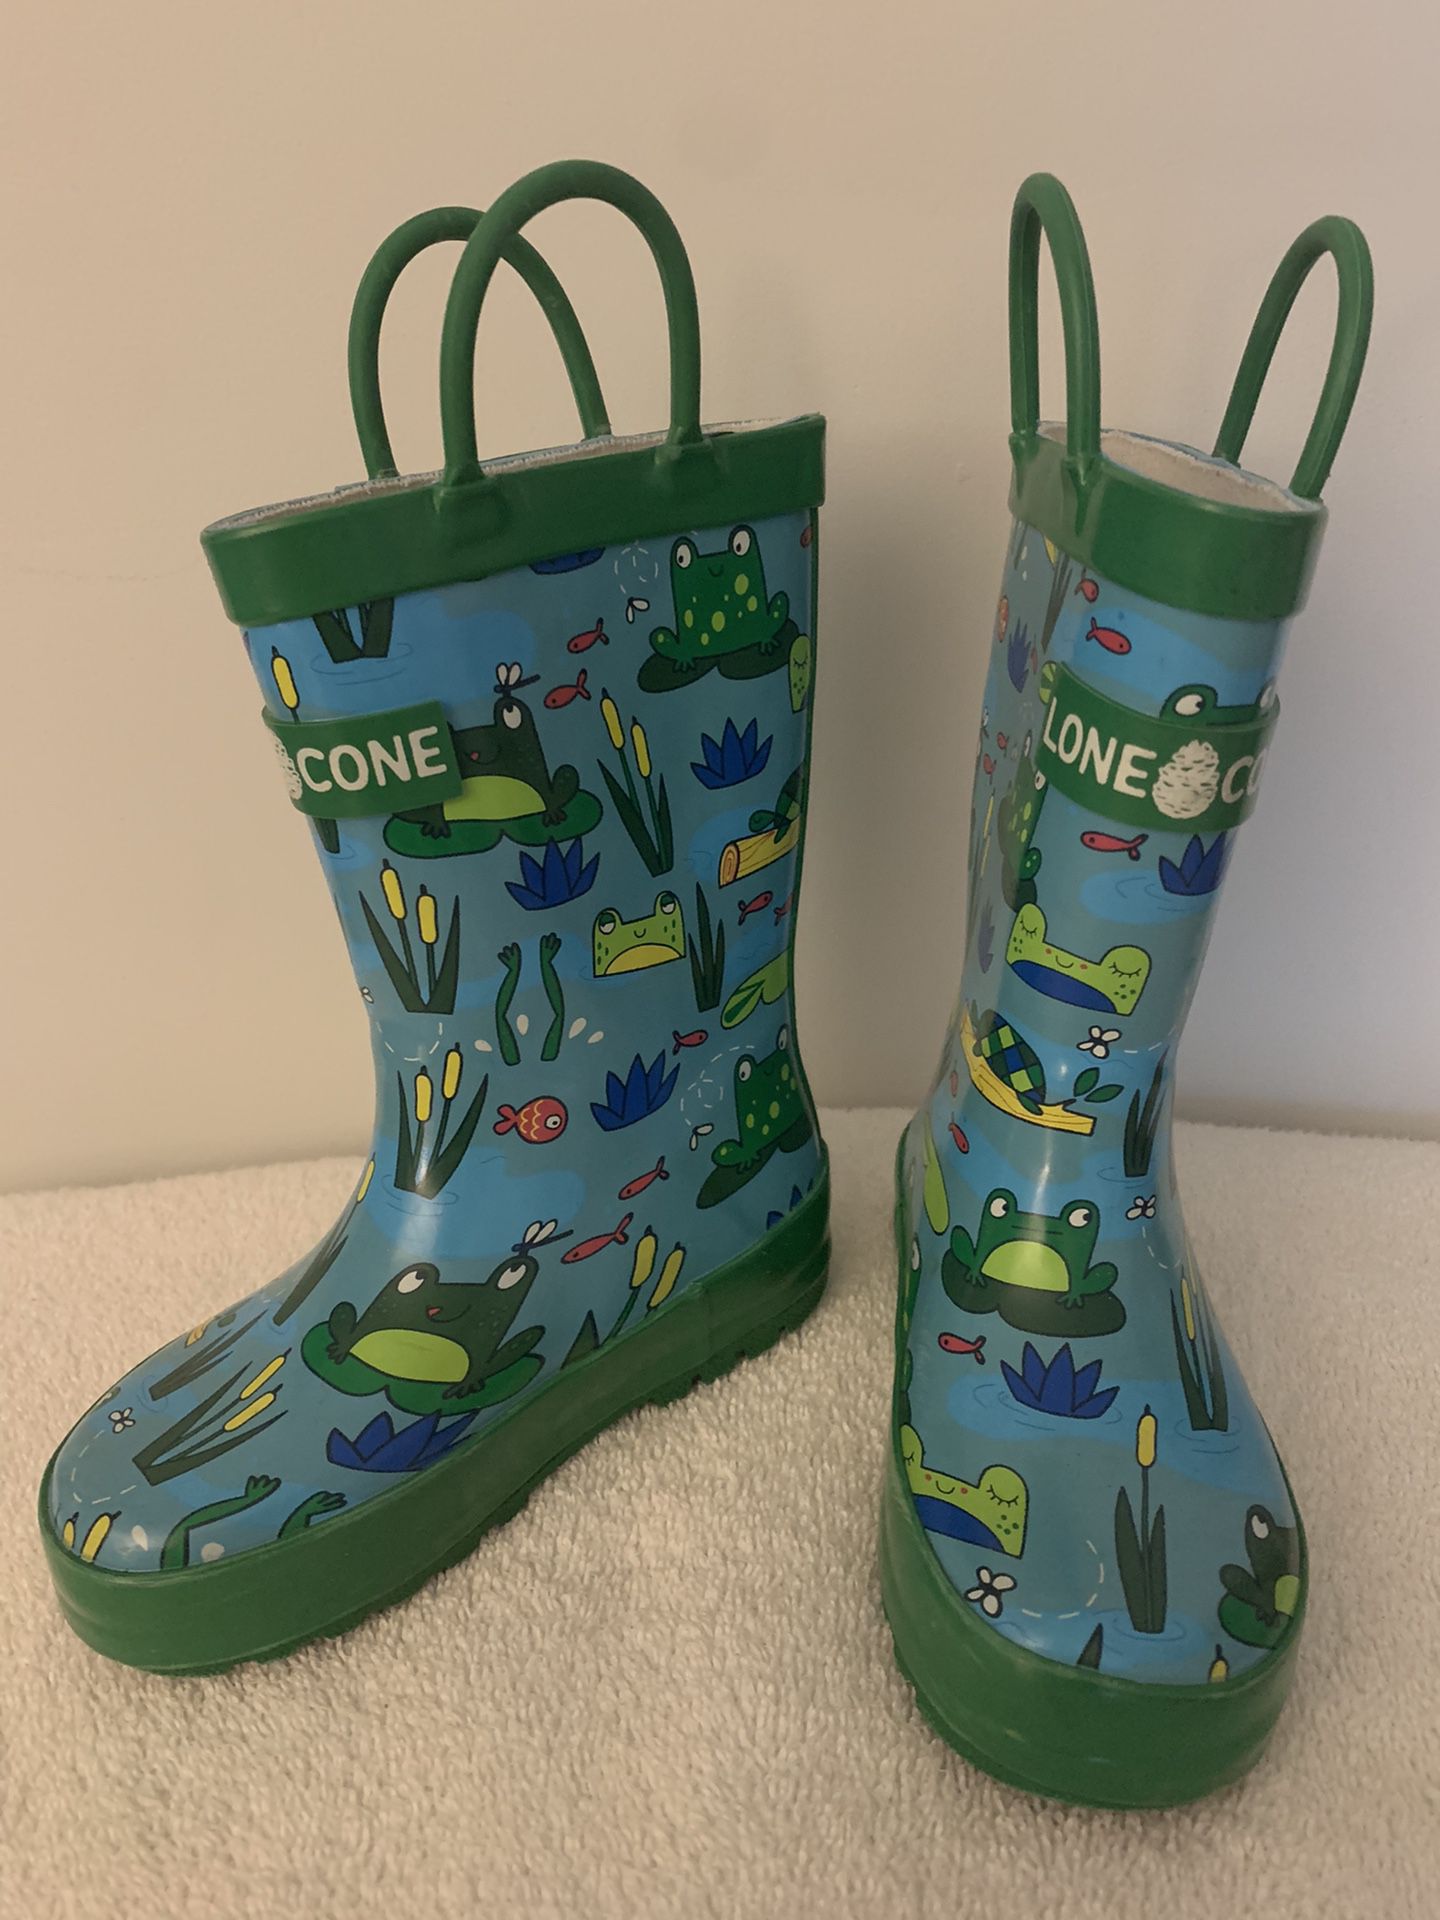 FREE LONECONE Rain Boots with Easy-On Handles in Fun Patterns & Solid Colors for Toddlers and Kids